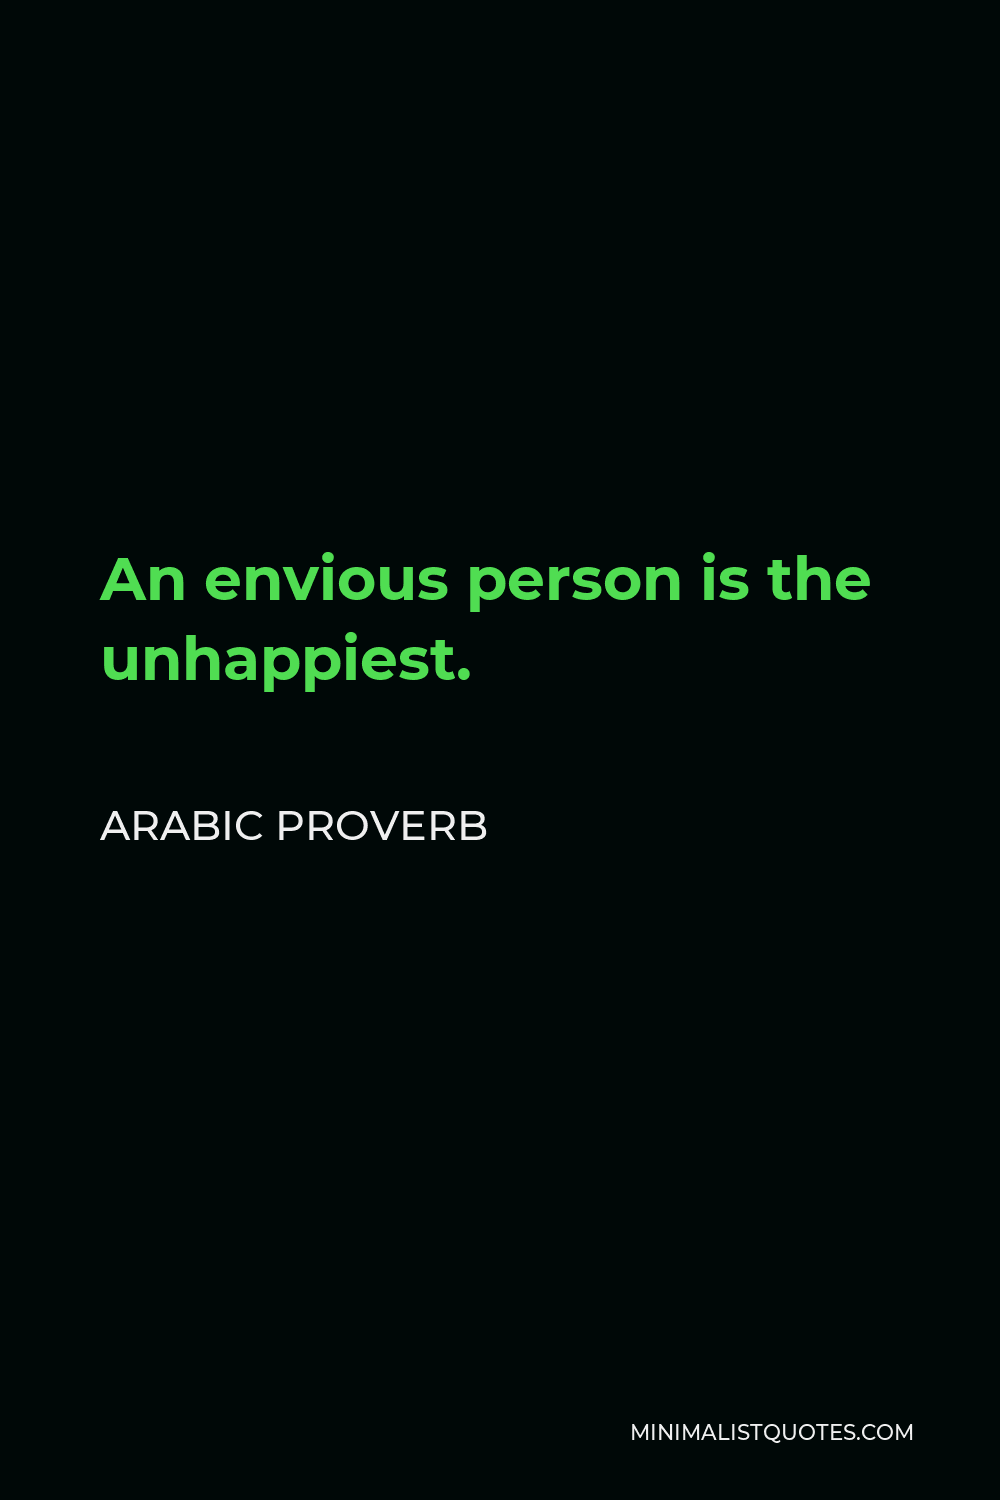 Arabic Proverb Quote - An envious person is the unhappiest.